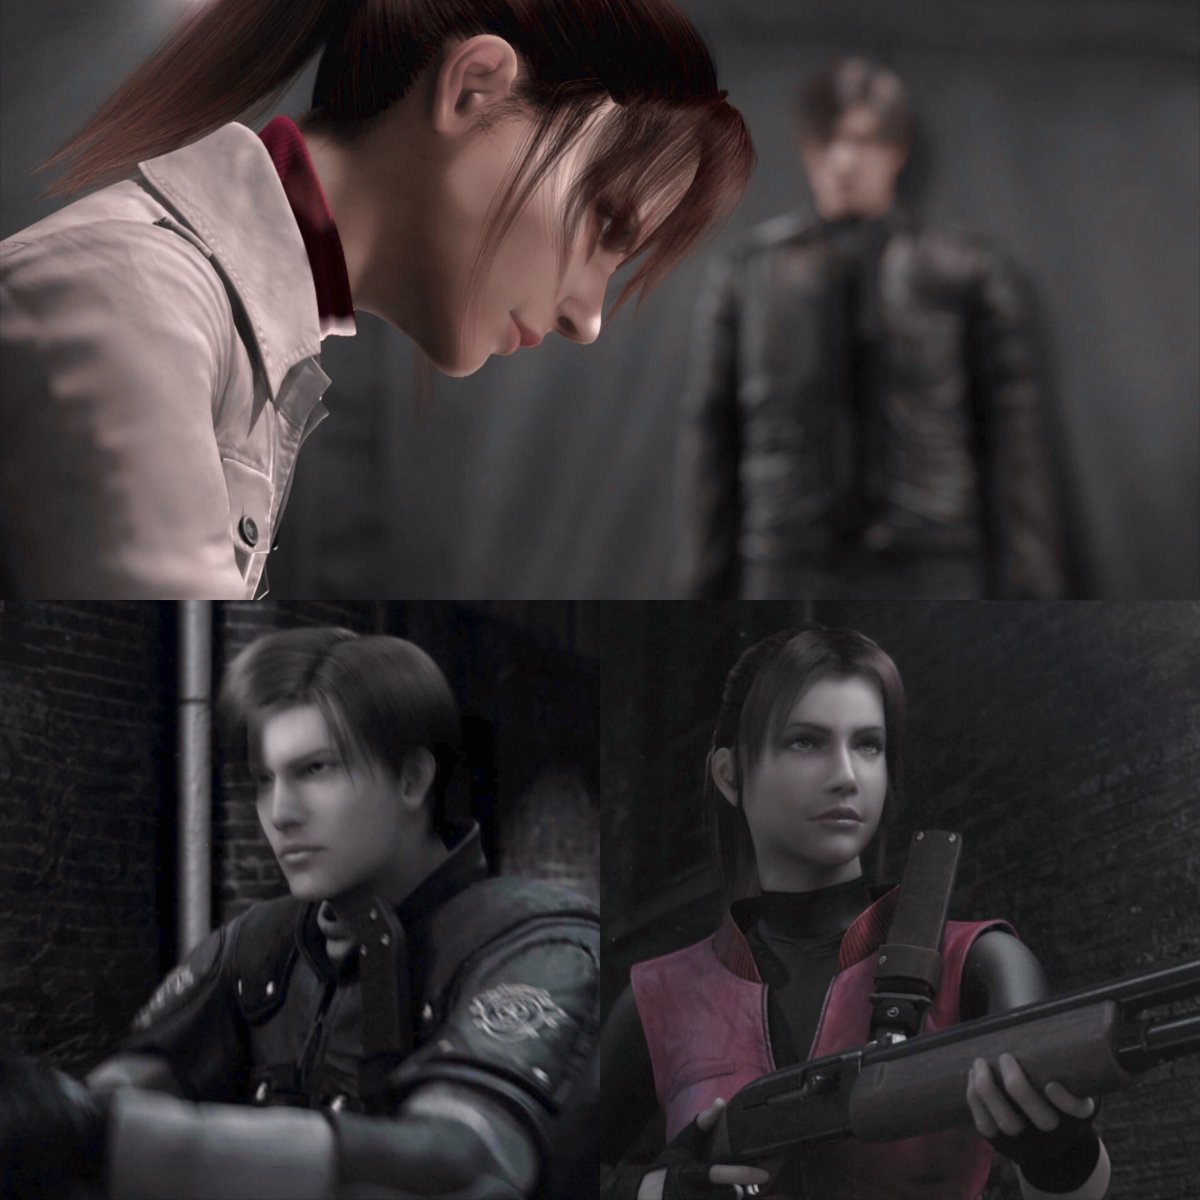 — claire and leon - re: degeneration 

#ClaireRedfield #LeonKennedy #REBHFun #ResidentEvil